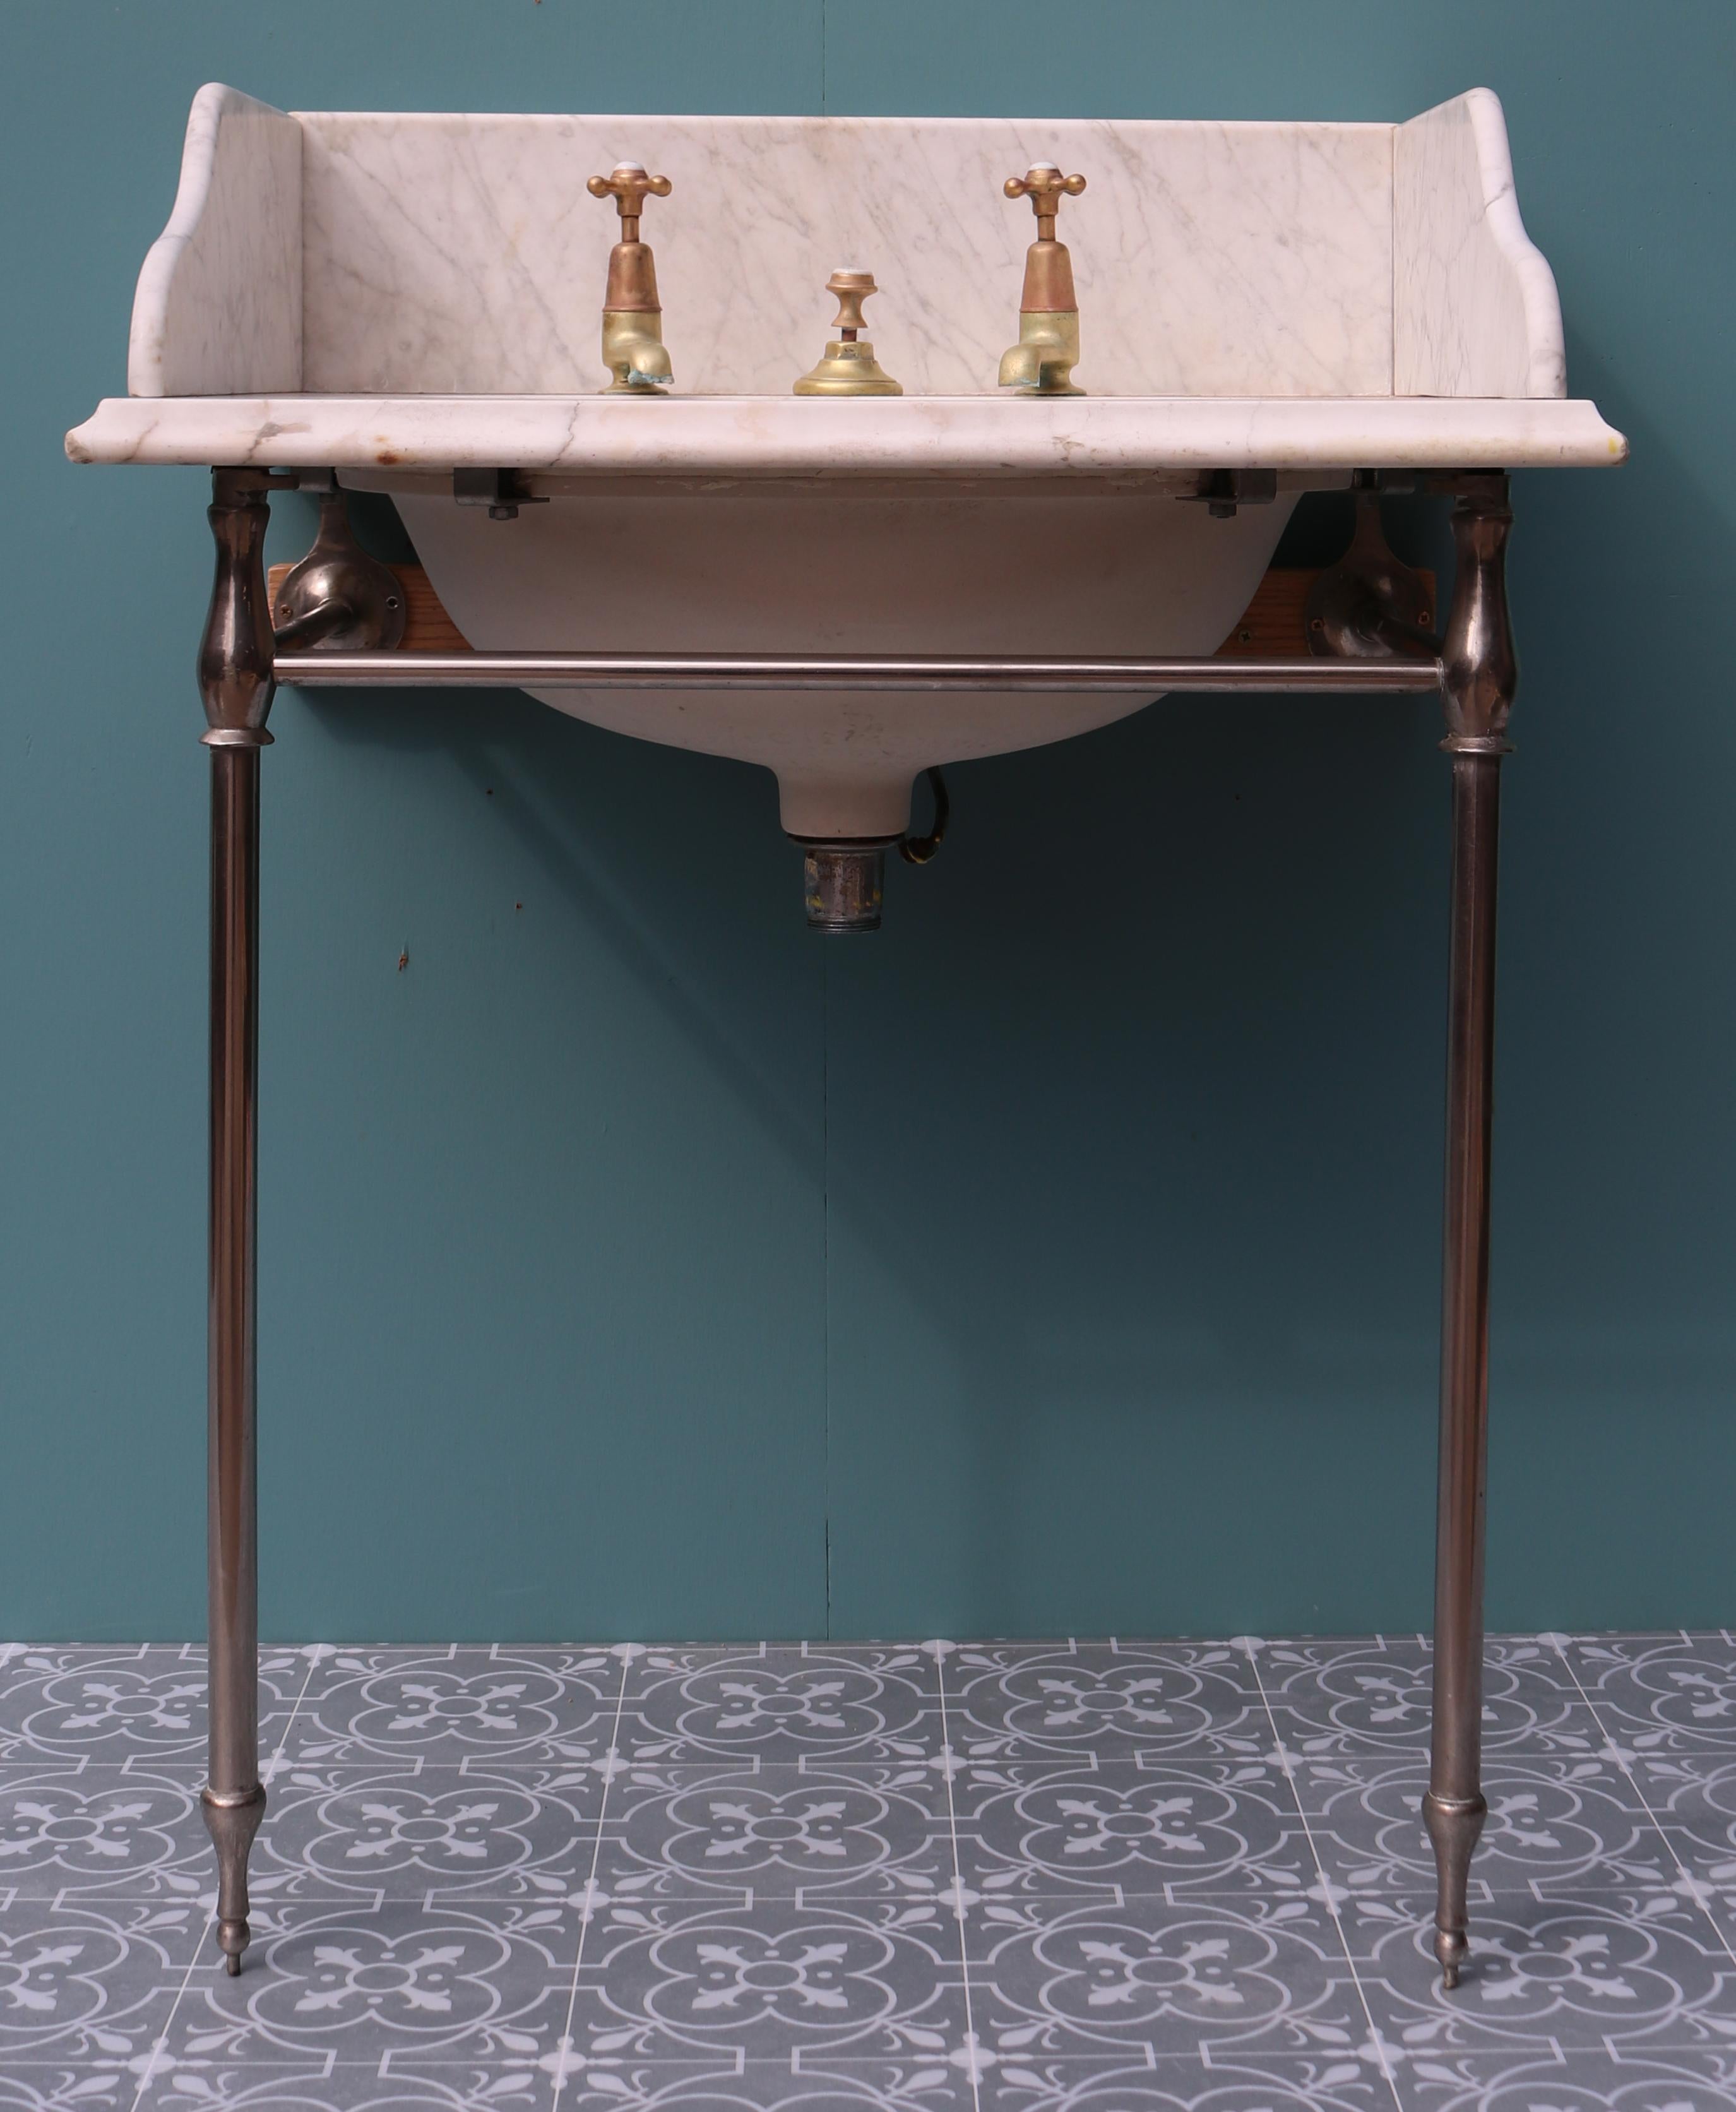 A Maple & Co. wash basin made from Carrara marble, with an under-mounted porcelain basin, fitted to a nickel-plated stand. This basin was salvaged from a house near Norwich.

Additional dimensions:

Splash back height 17.5 cm

 

Condition